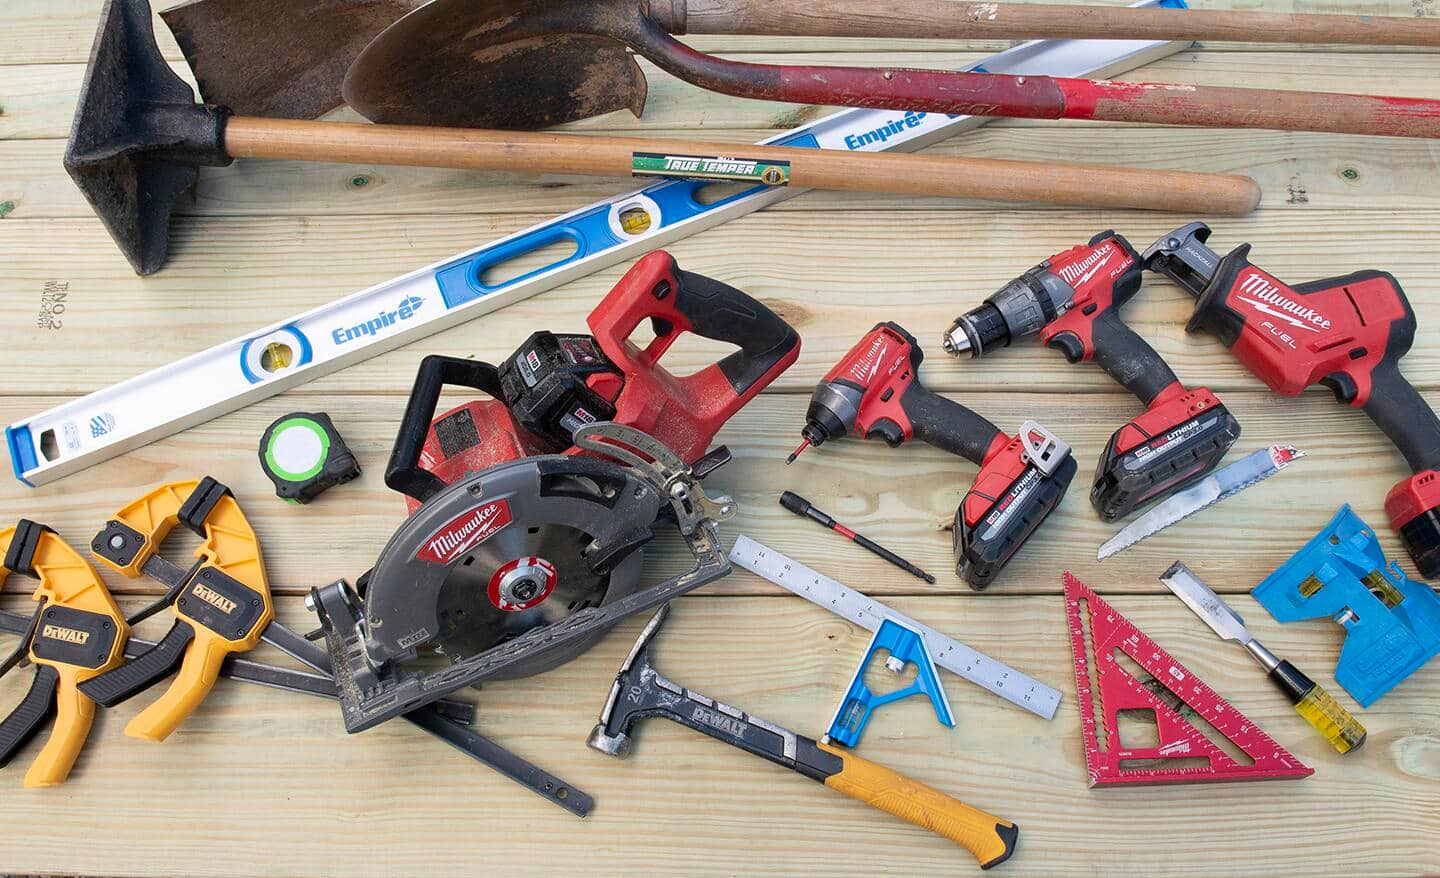 A collection of some tools used in this project, clamps, circular saw, 48 inch level, post level, squares, drill, impact driver, reciprocating saw, chisel, hammer, tape measure, shovels and tamper.